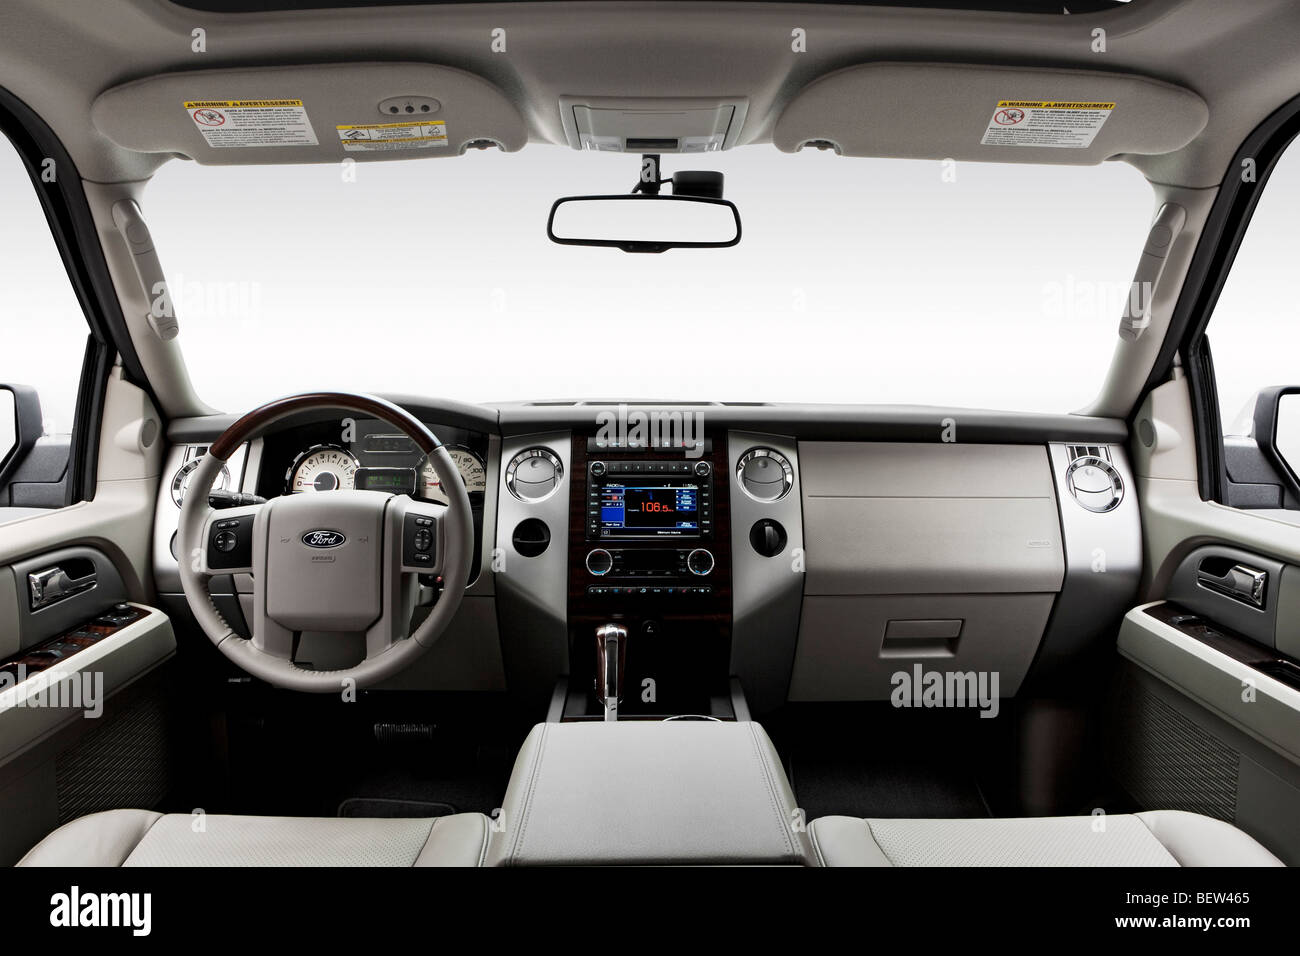 2010 Ford Expedition El Limited In White Dashboard Center